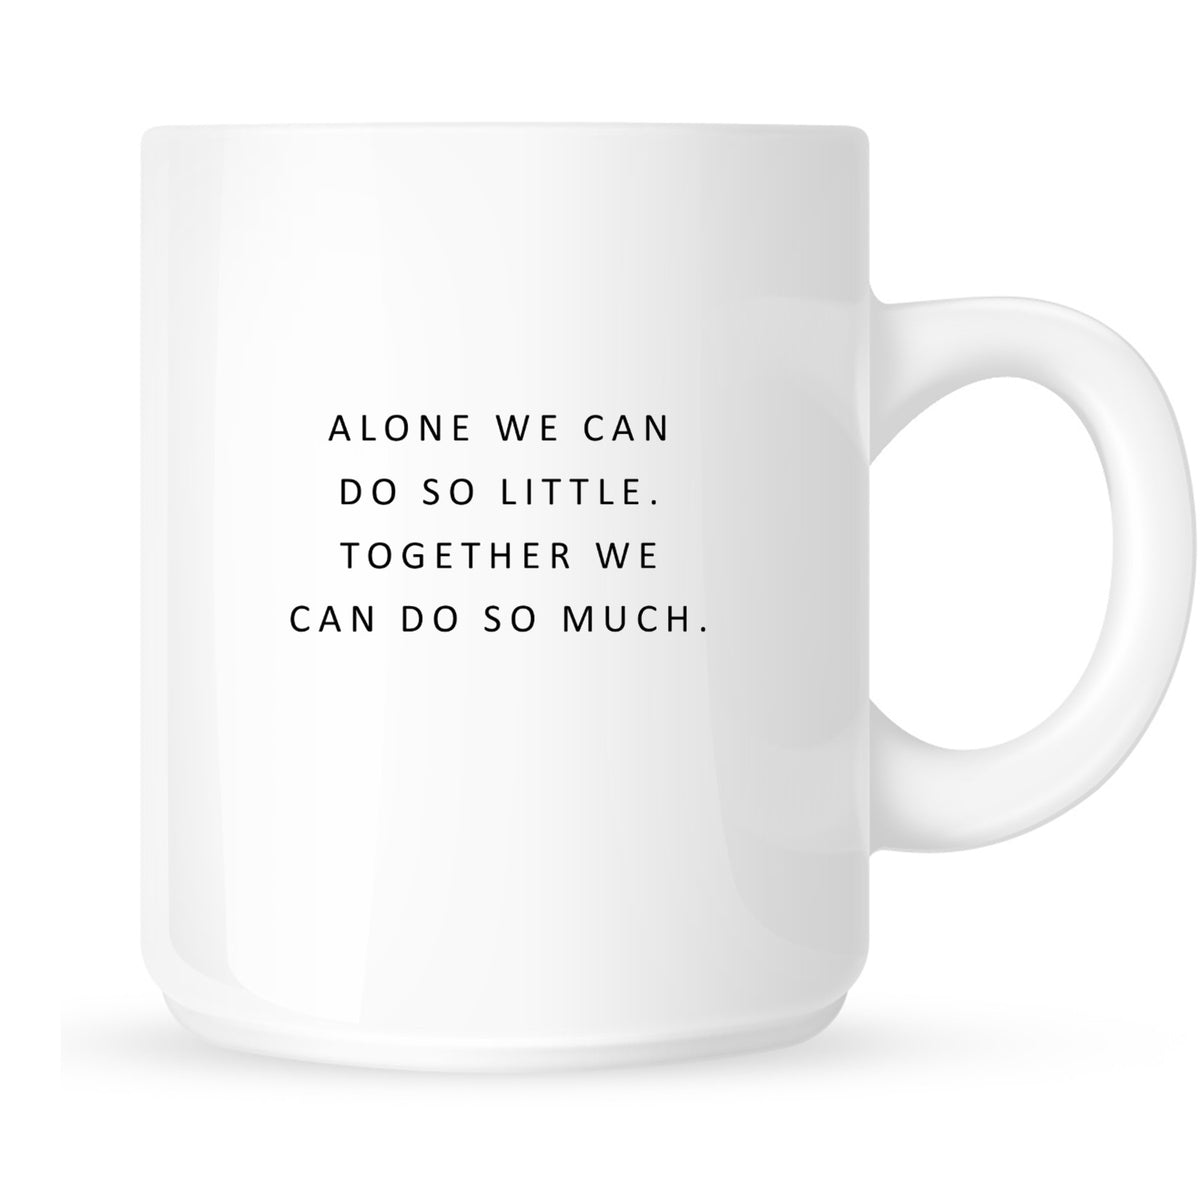 Mug - Alone We Can Do So Little. Together We Can Do So Much.